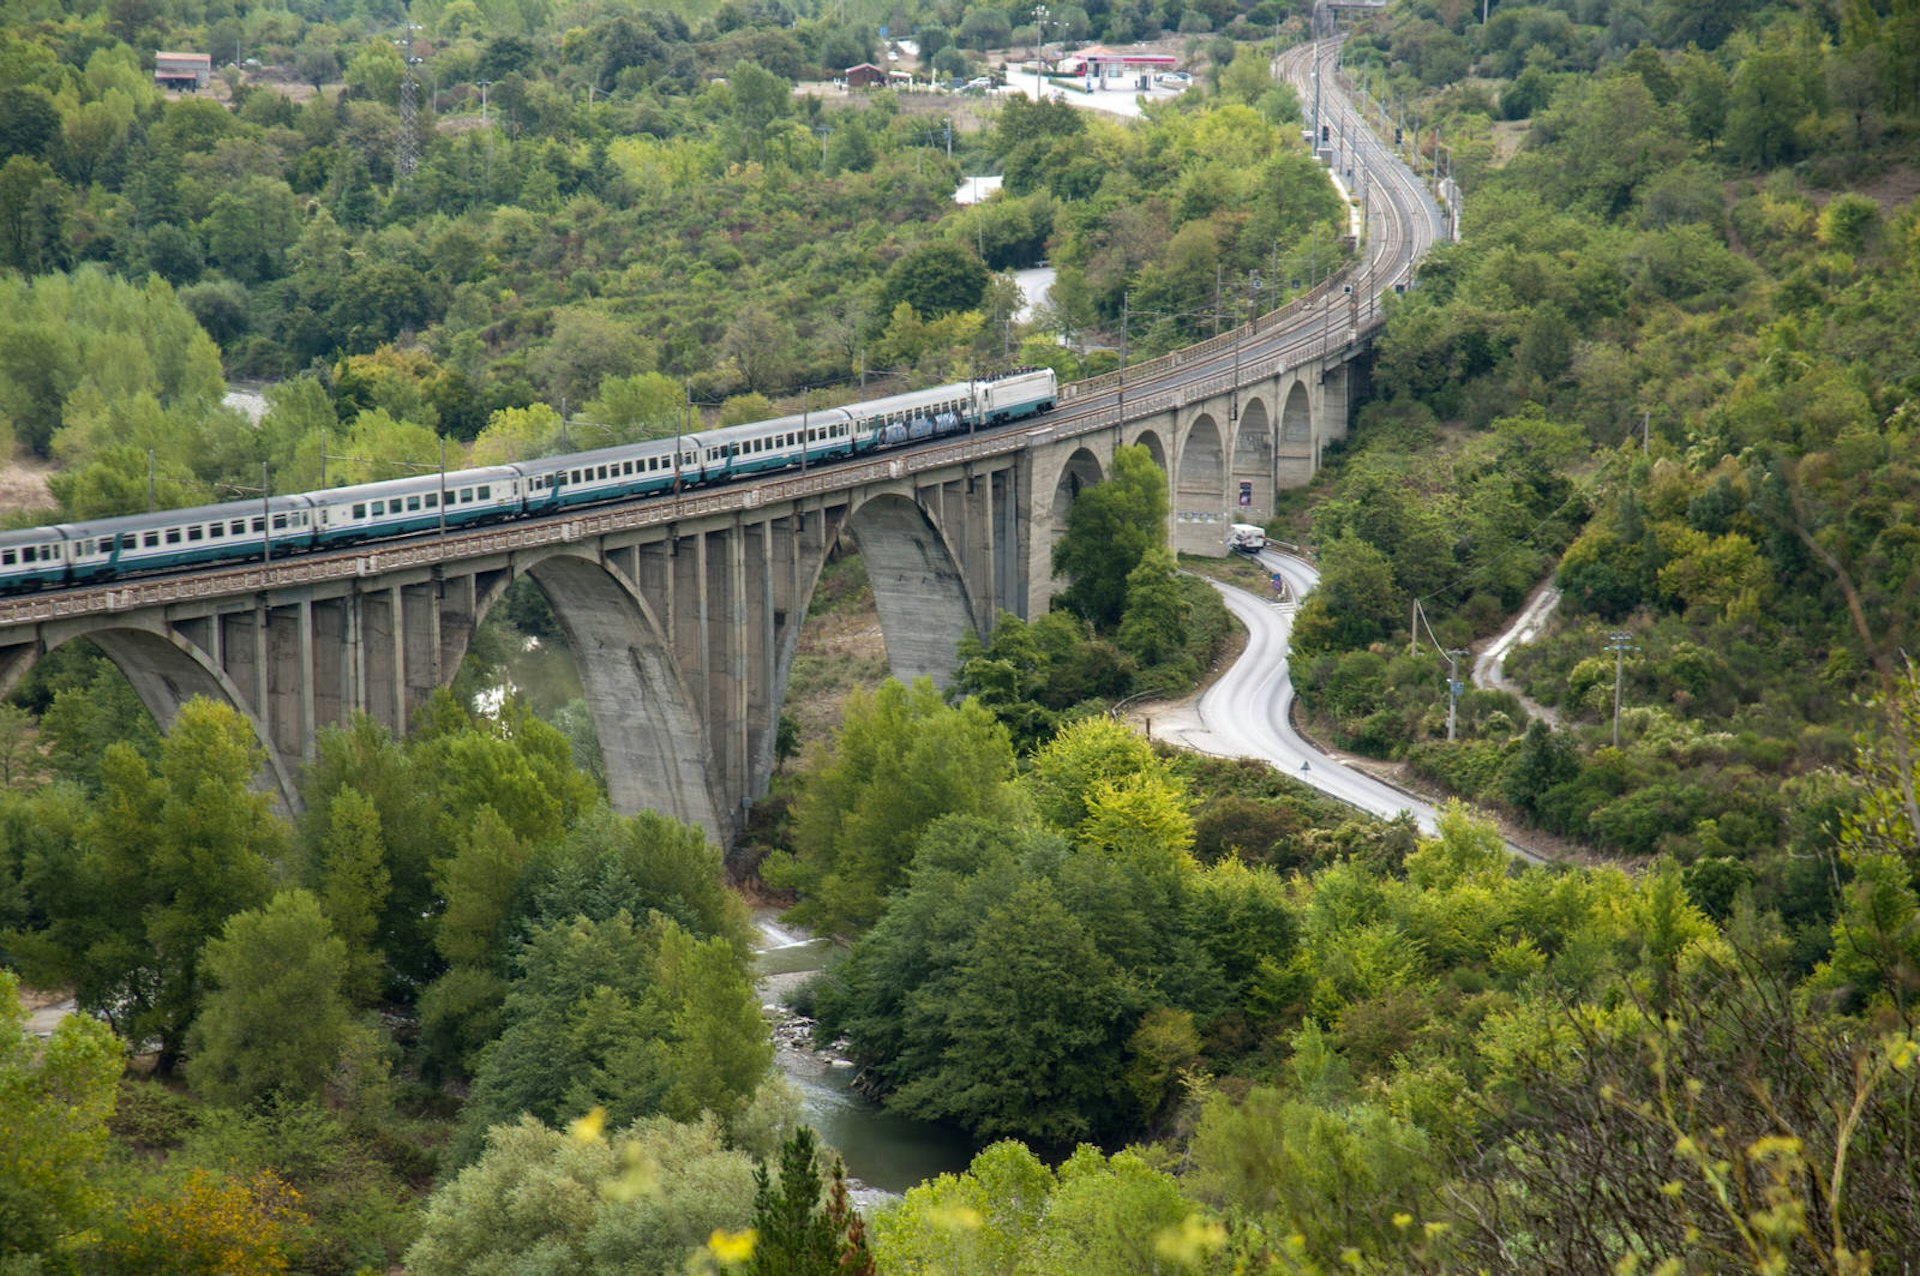 Many of Italy's regionale trains pass through spectacular scenery